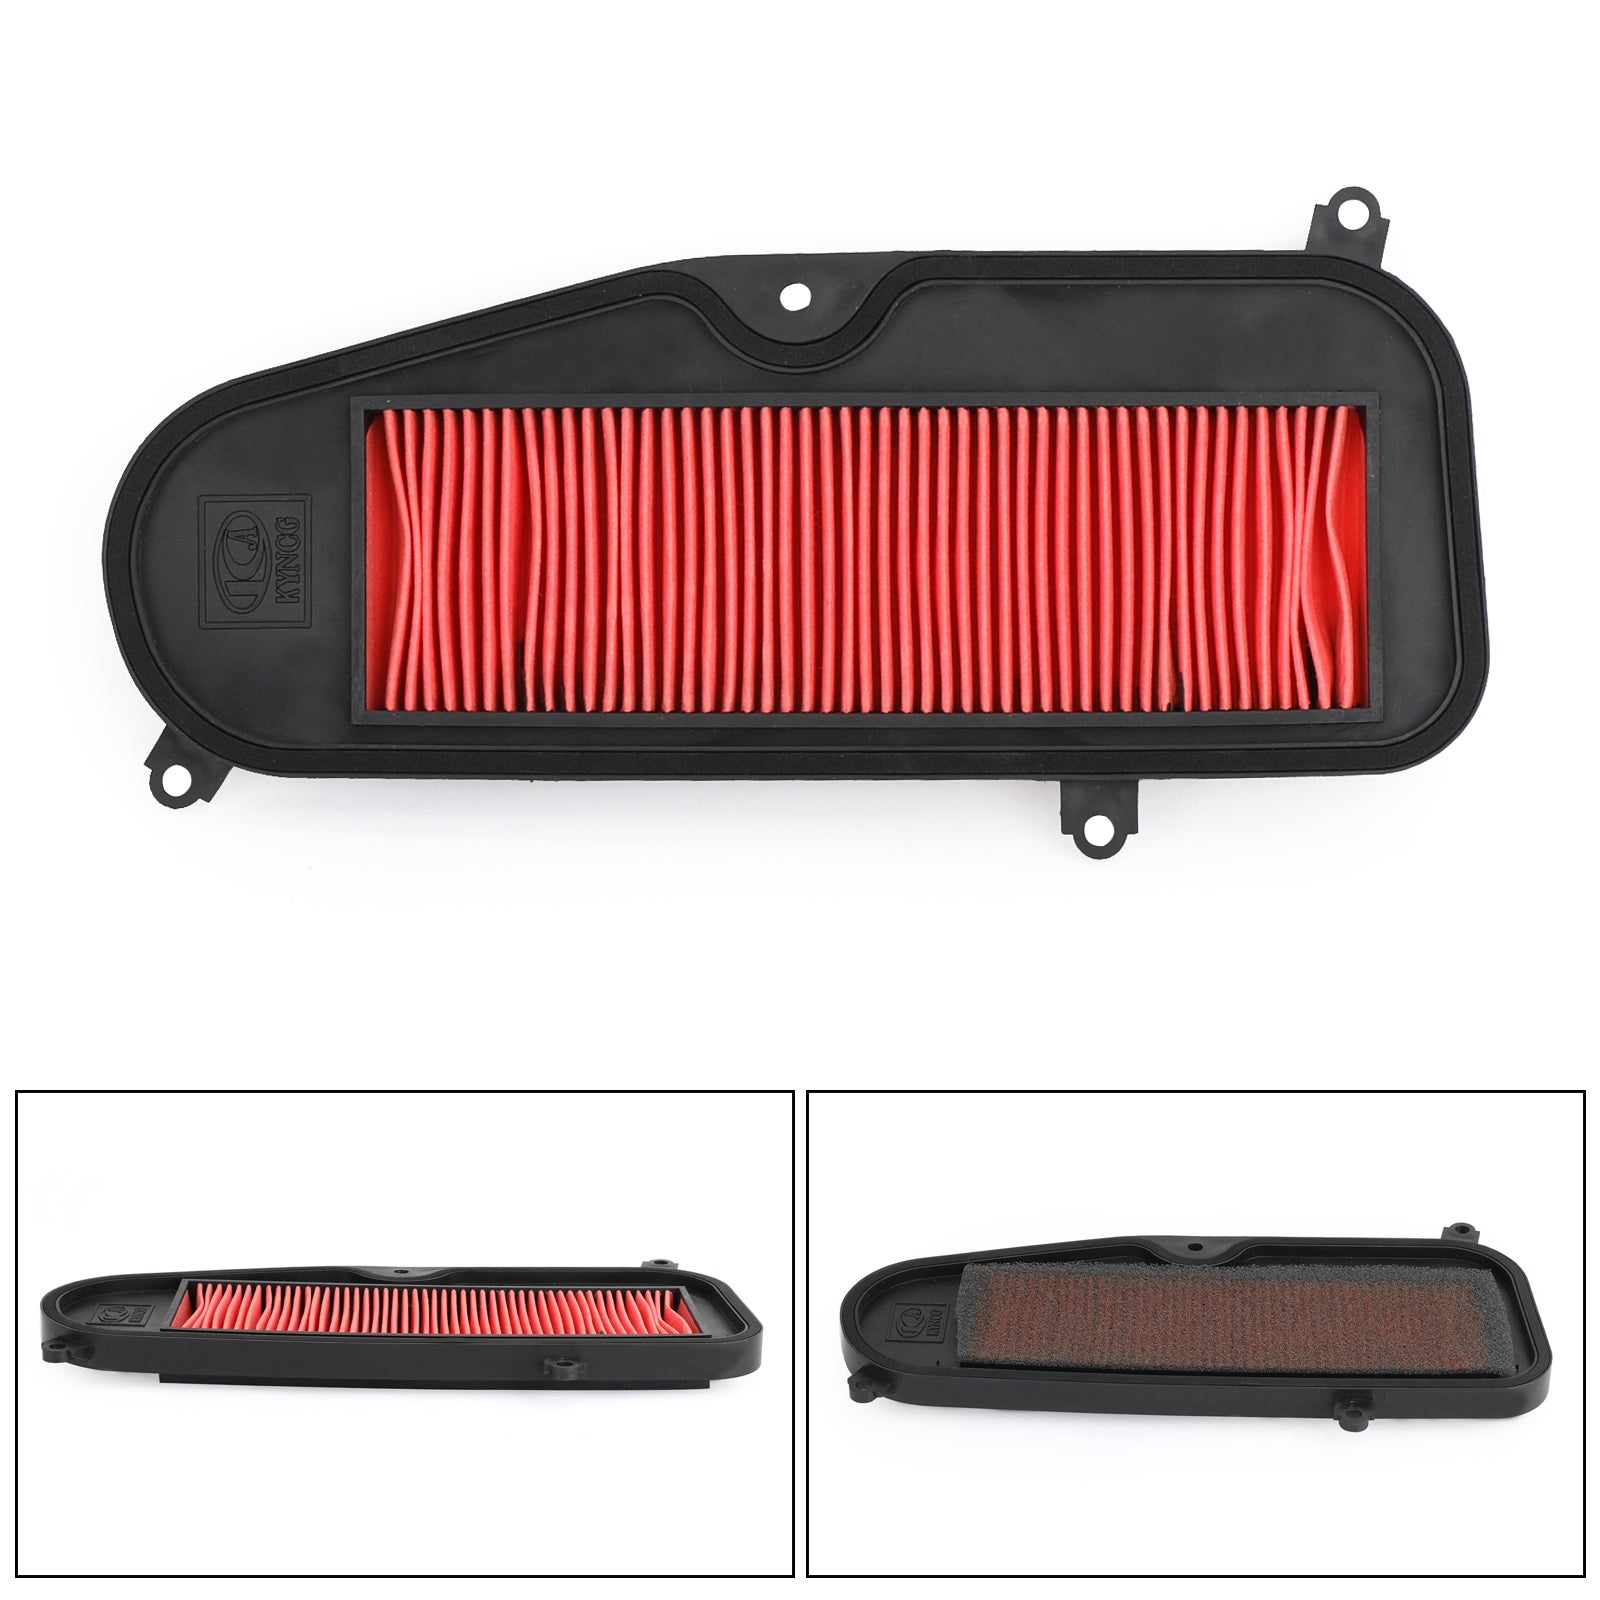 Air Filter Element For KYMCO DINK CLASSIC 125 150 200 LX 2002-2007 P/N.00162993 Generic